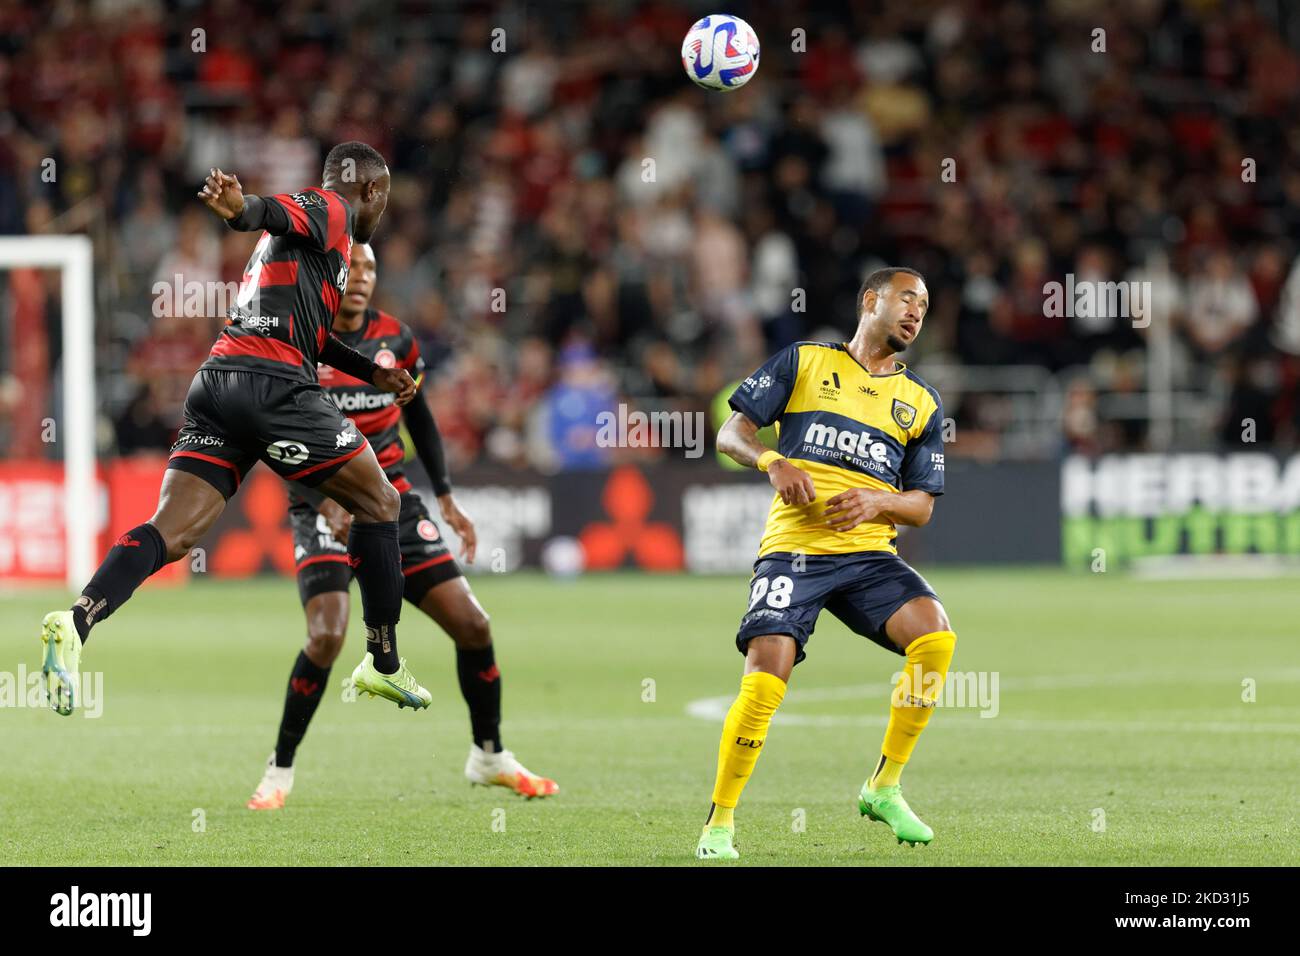 SYDNEY, AUSTRALIA - NOVEMBER 5: Adama Traore of the Wanderers heads the ball during the match between the Wanderers and the Mariners at CommBank Stadium on November 5, 2022 in Sydney, Australia Credit: IOIO IMAGES/Alamy Live News Stock Photo